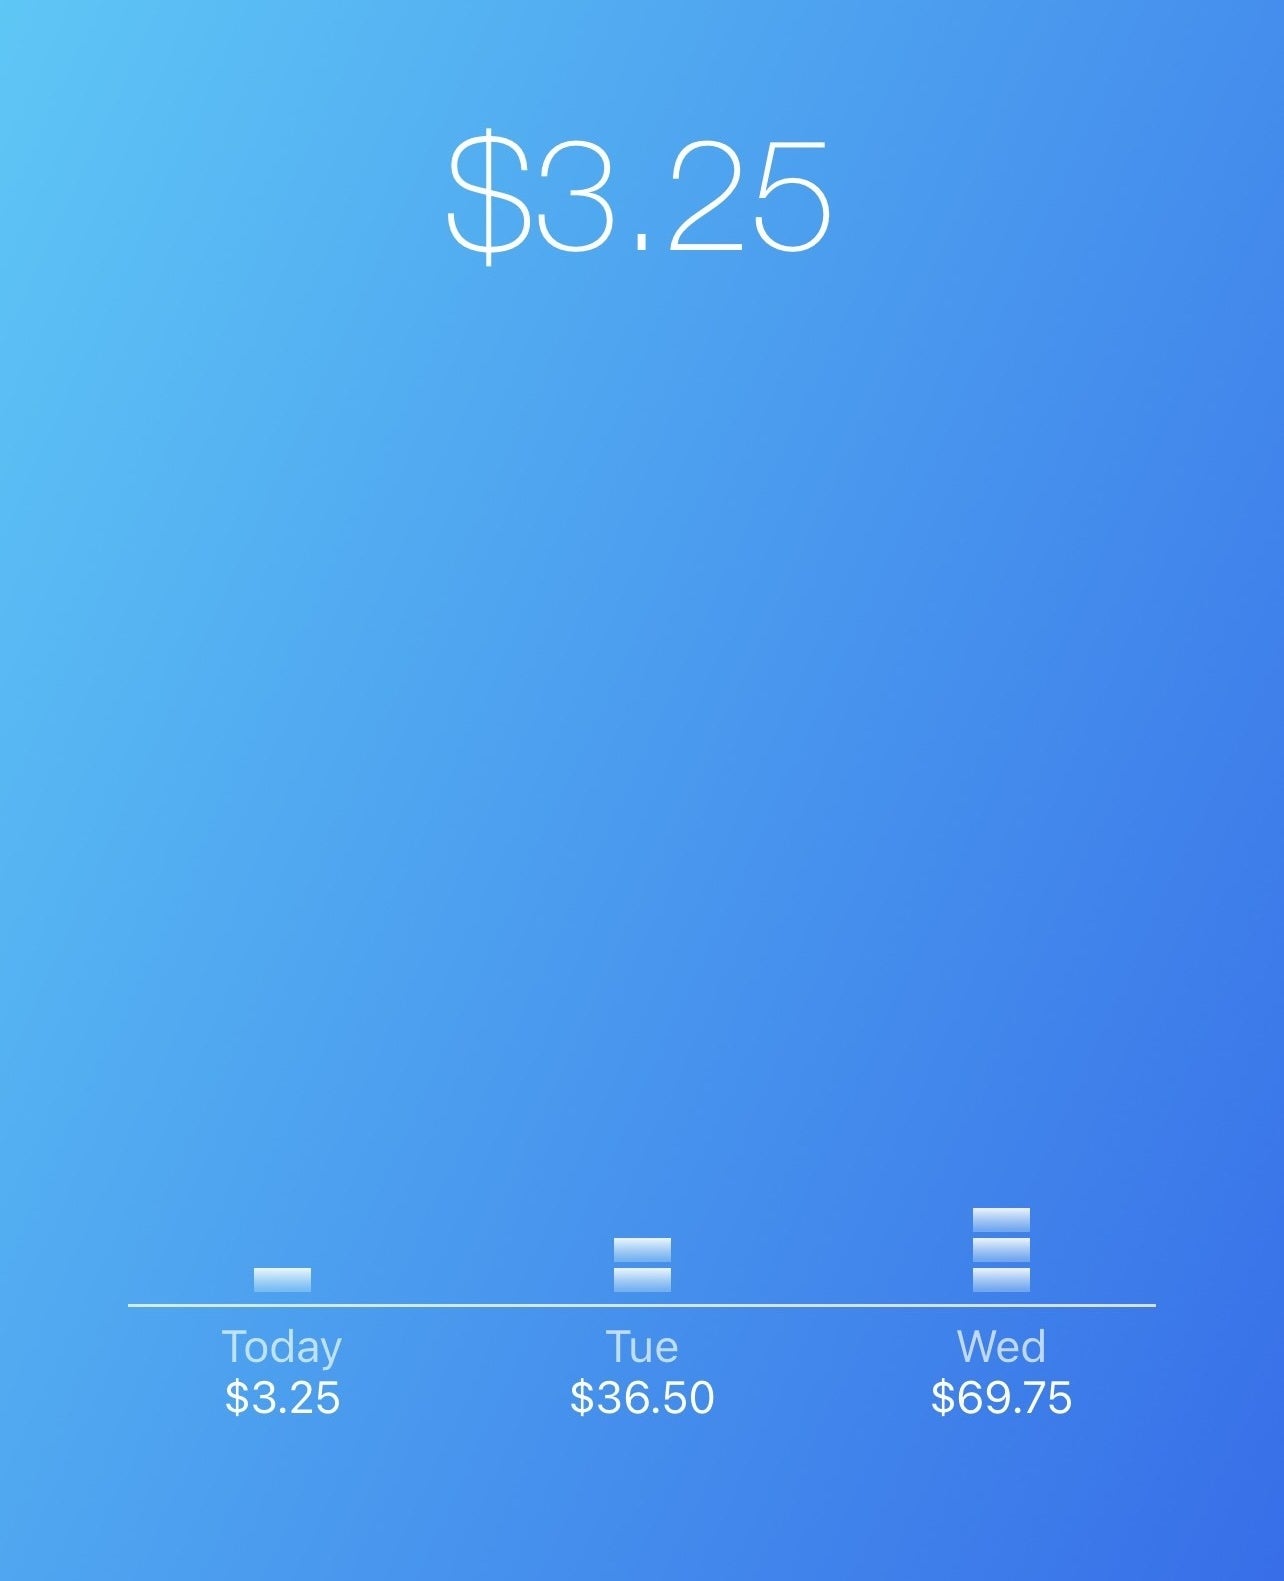 A screenshot of the app with $3.25 left in the budget